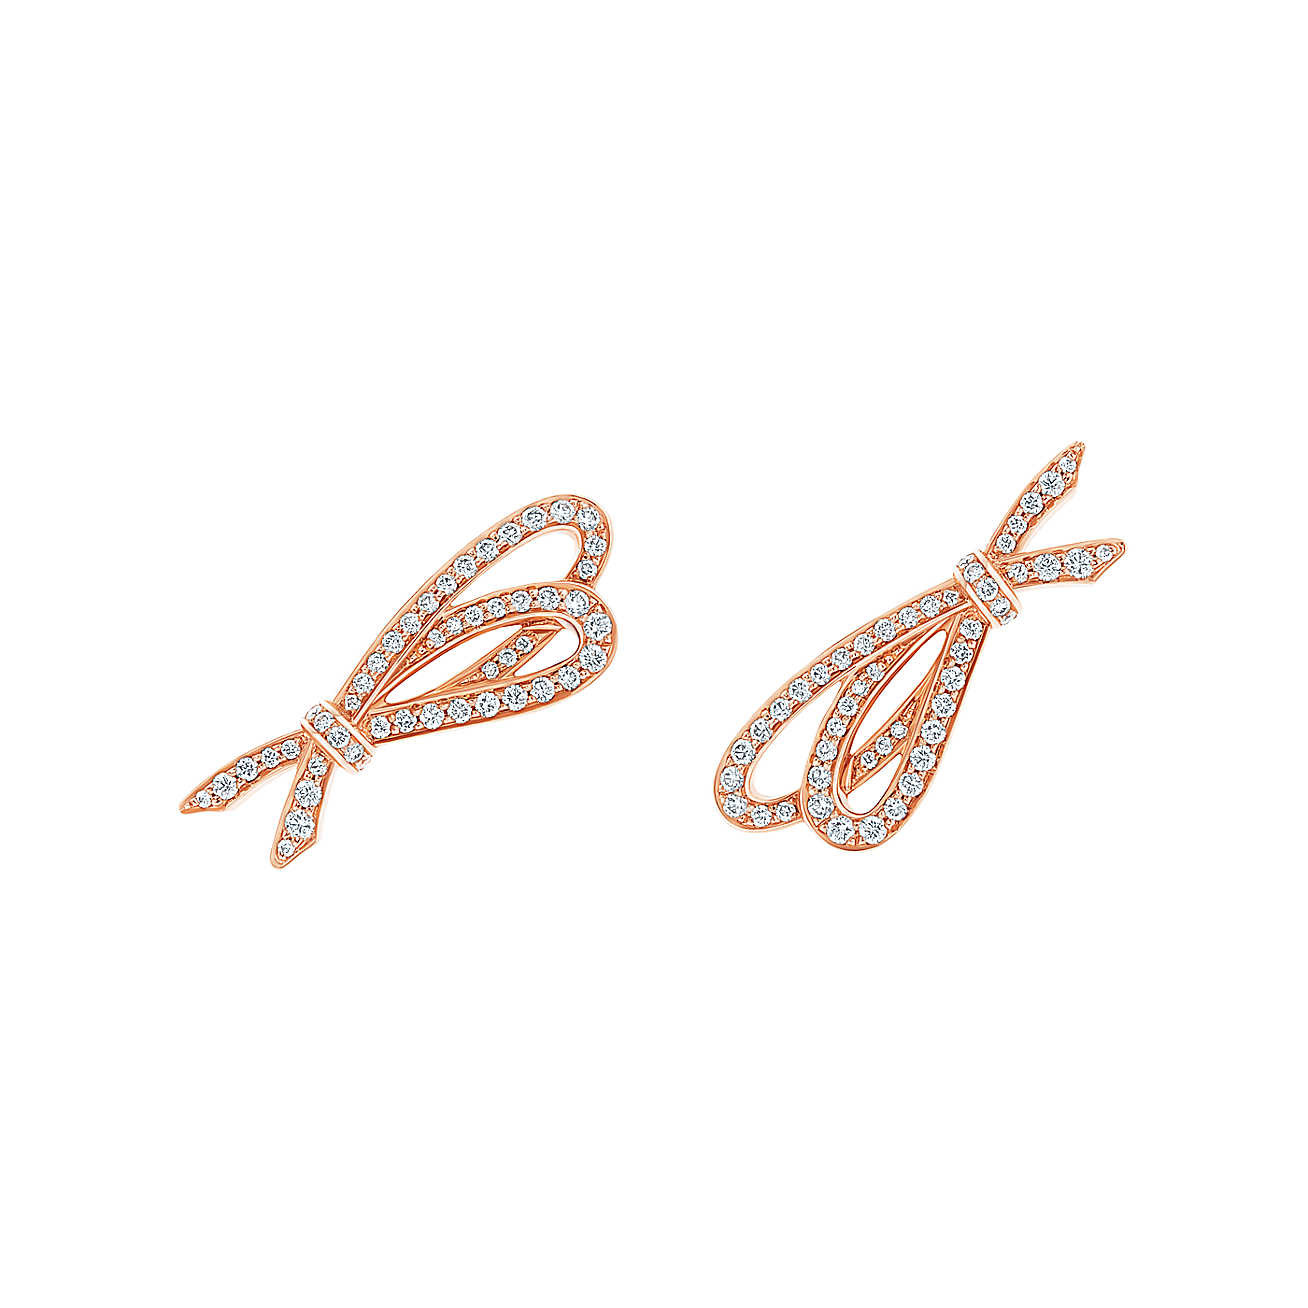 Tiffany Bow Earrings
 Tiffany Bow earrings in 18k rose gold with diamonds